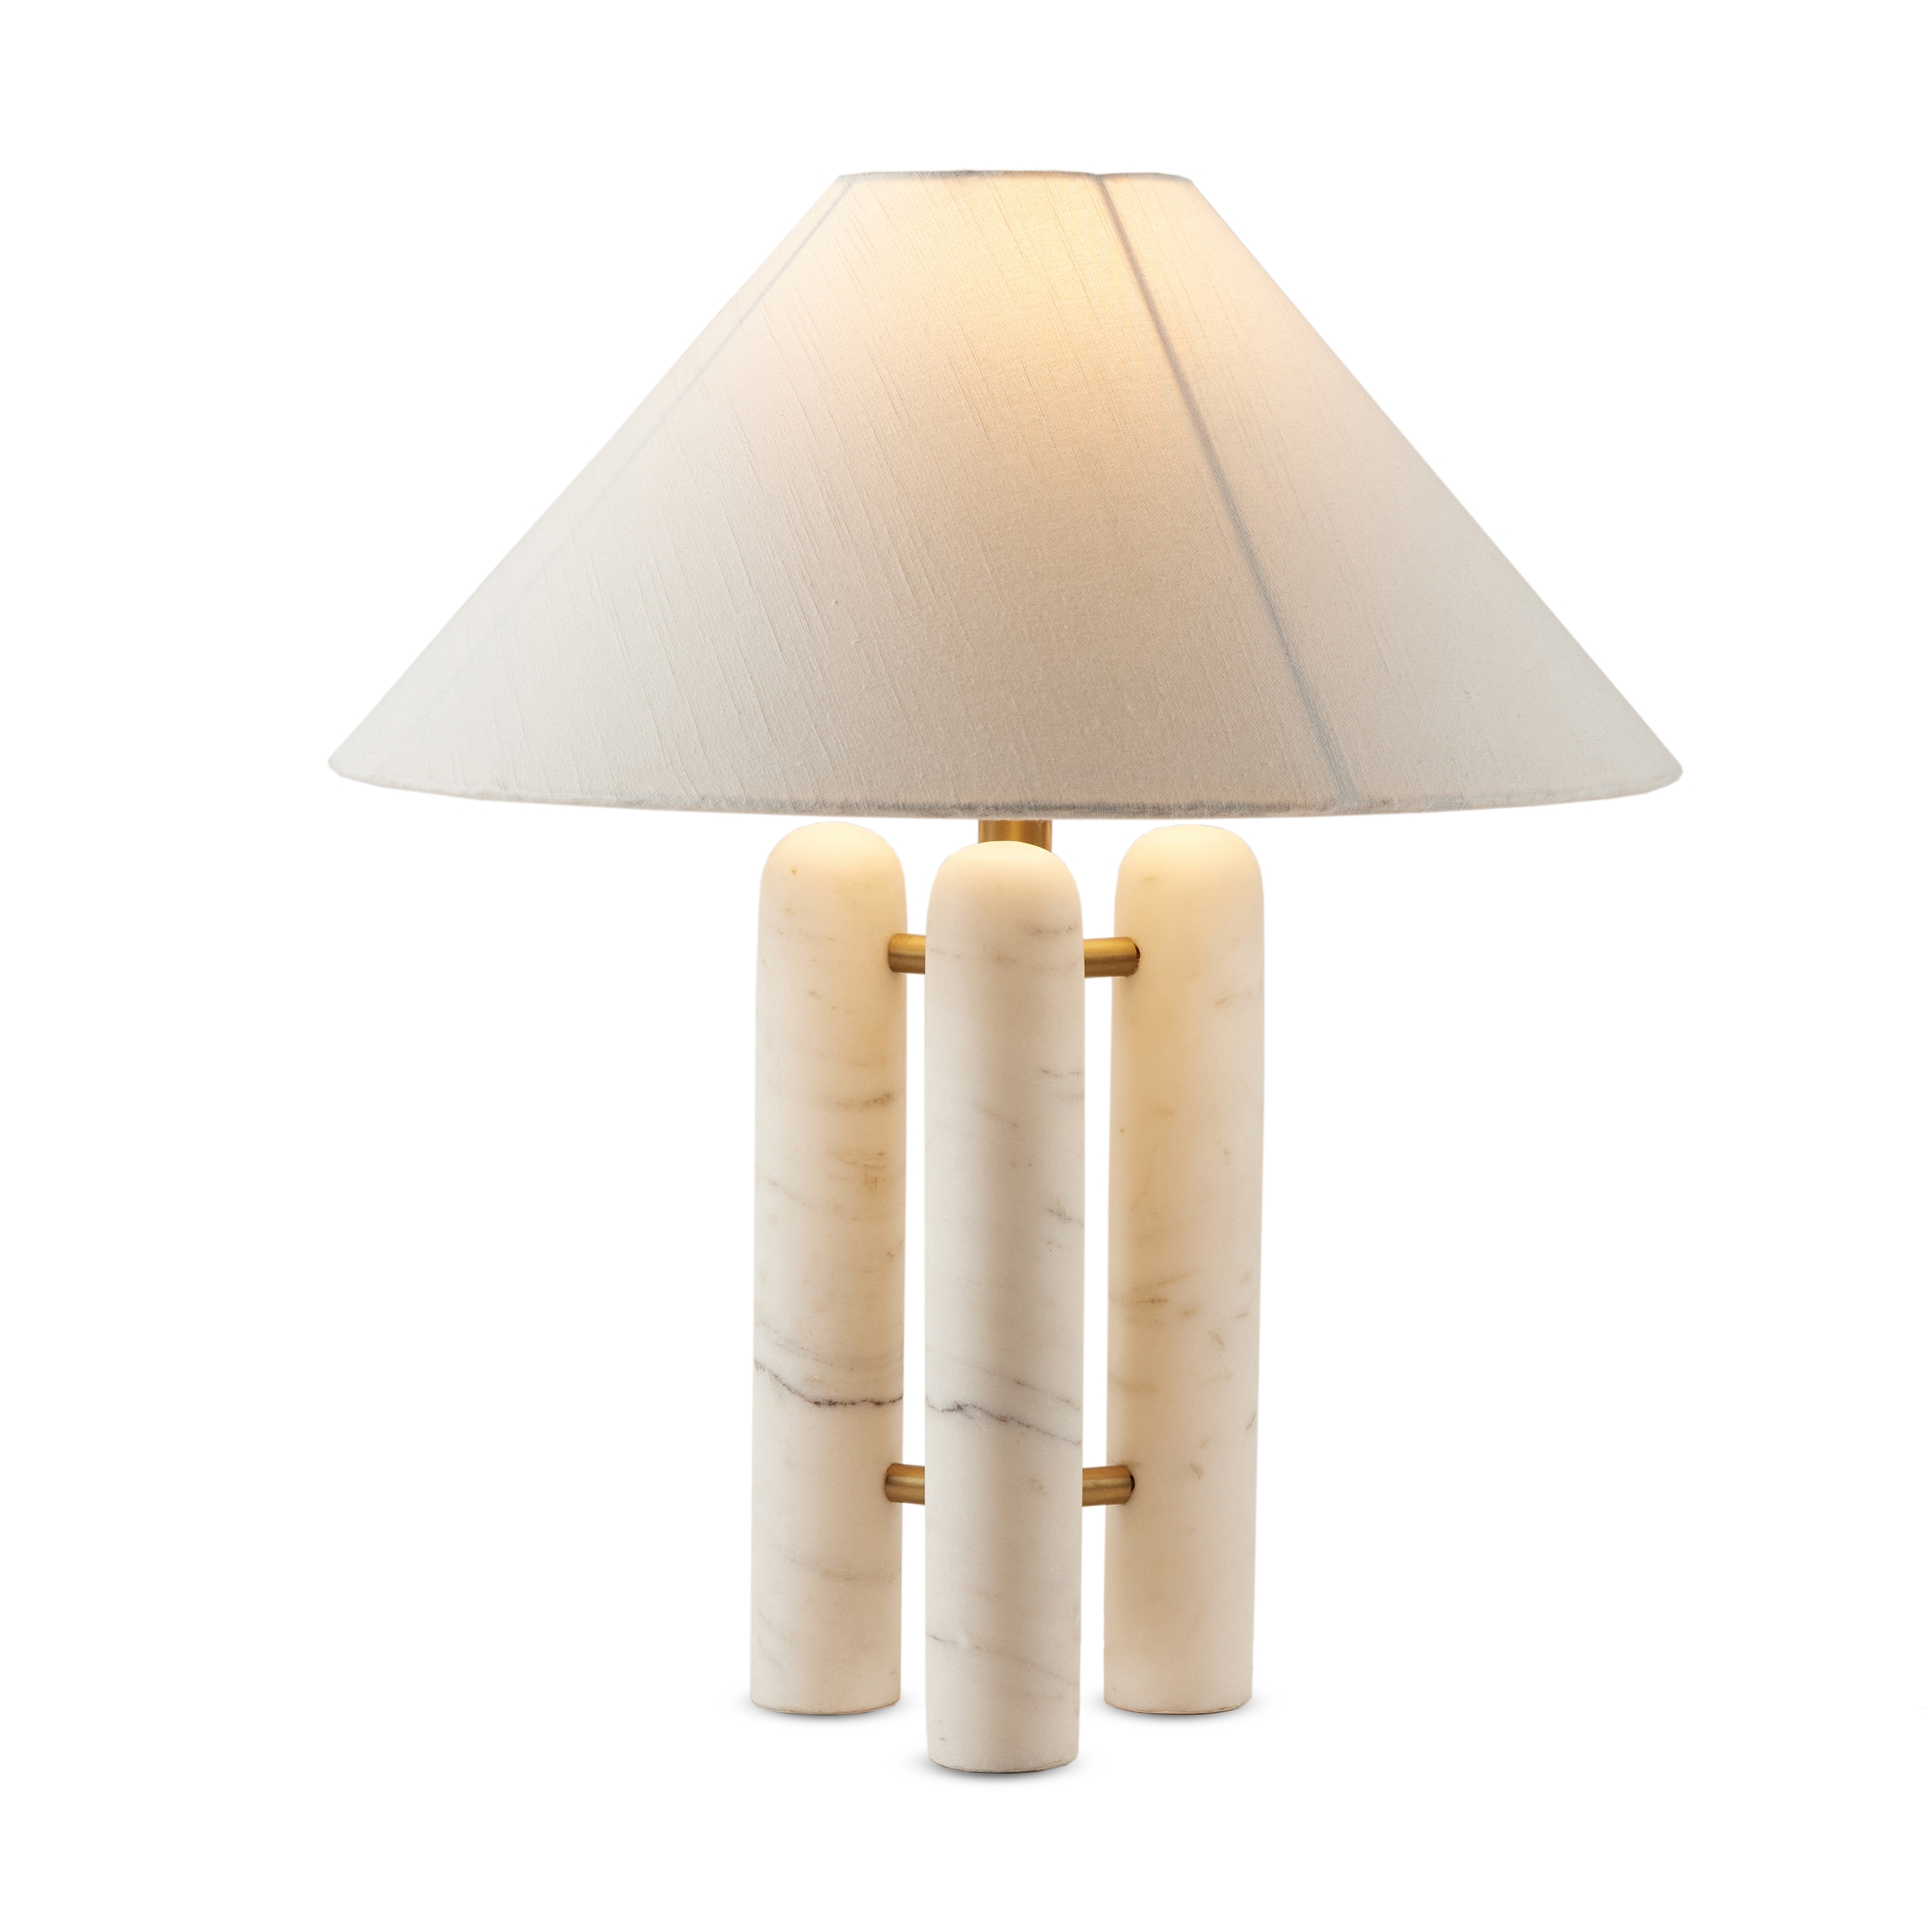 Medici Table Lamp-Chrcl And White Mrbl - Image 3